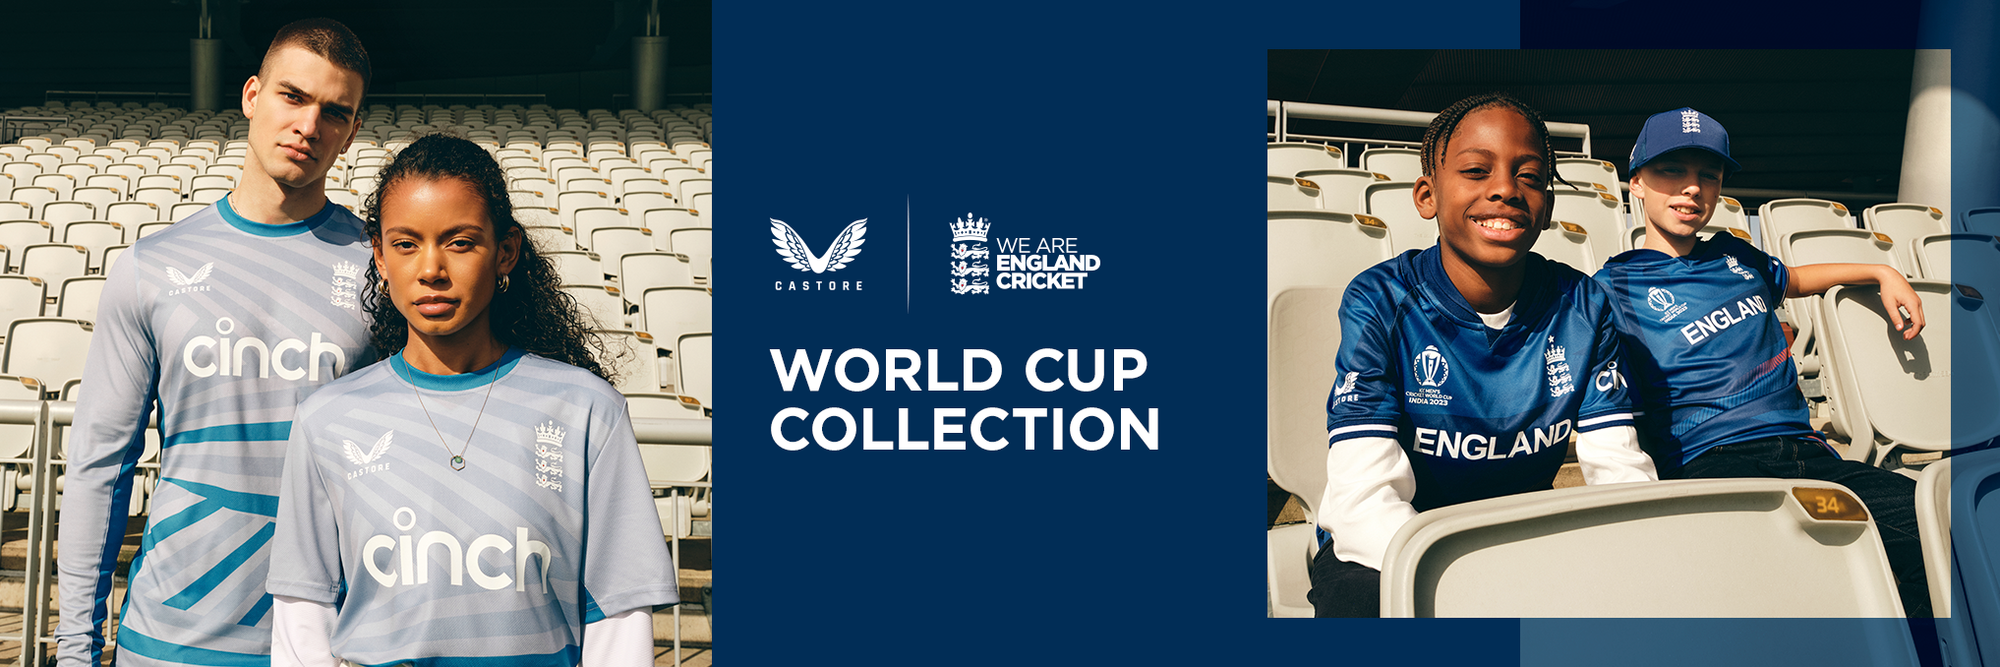 ODI World Cup Collection